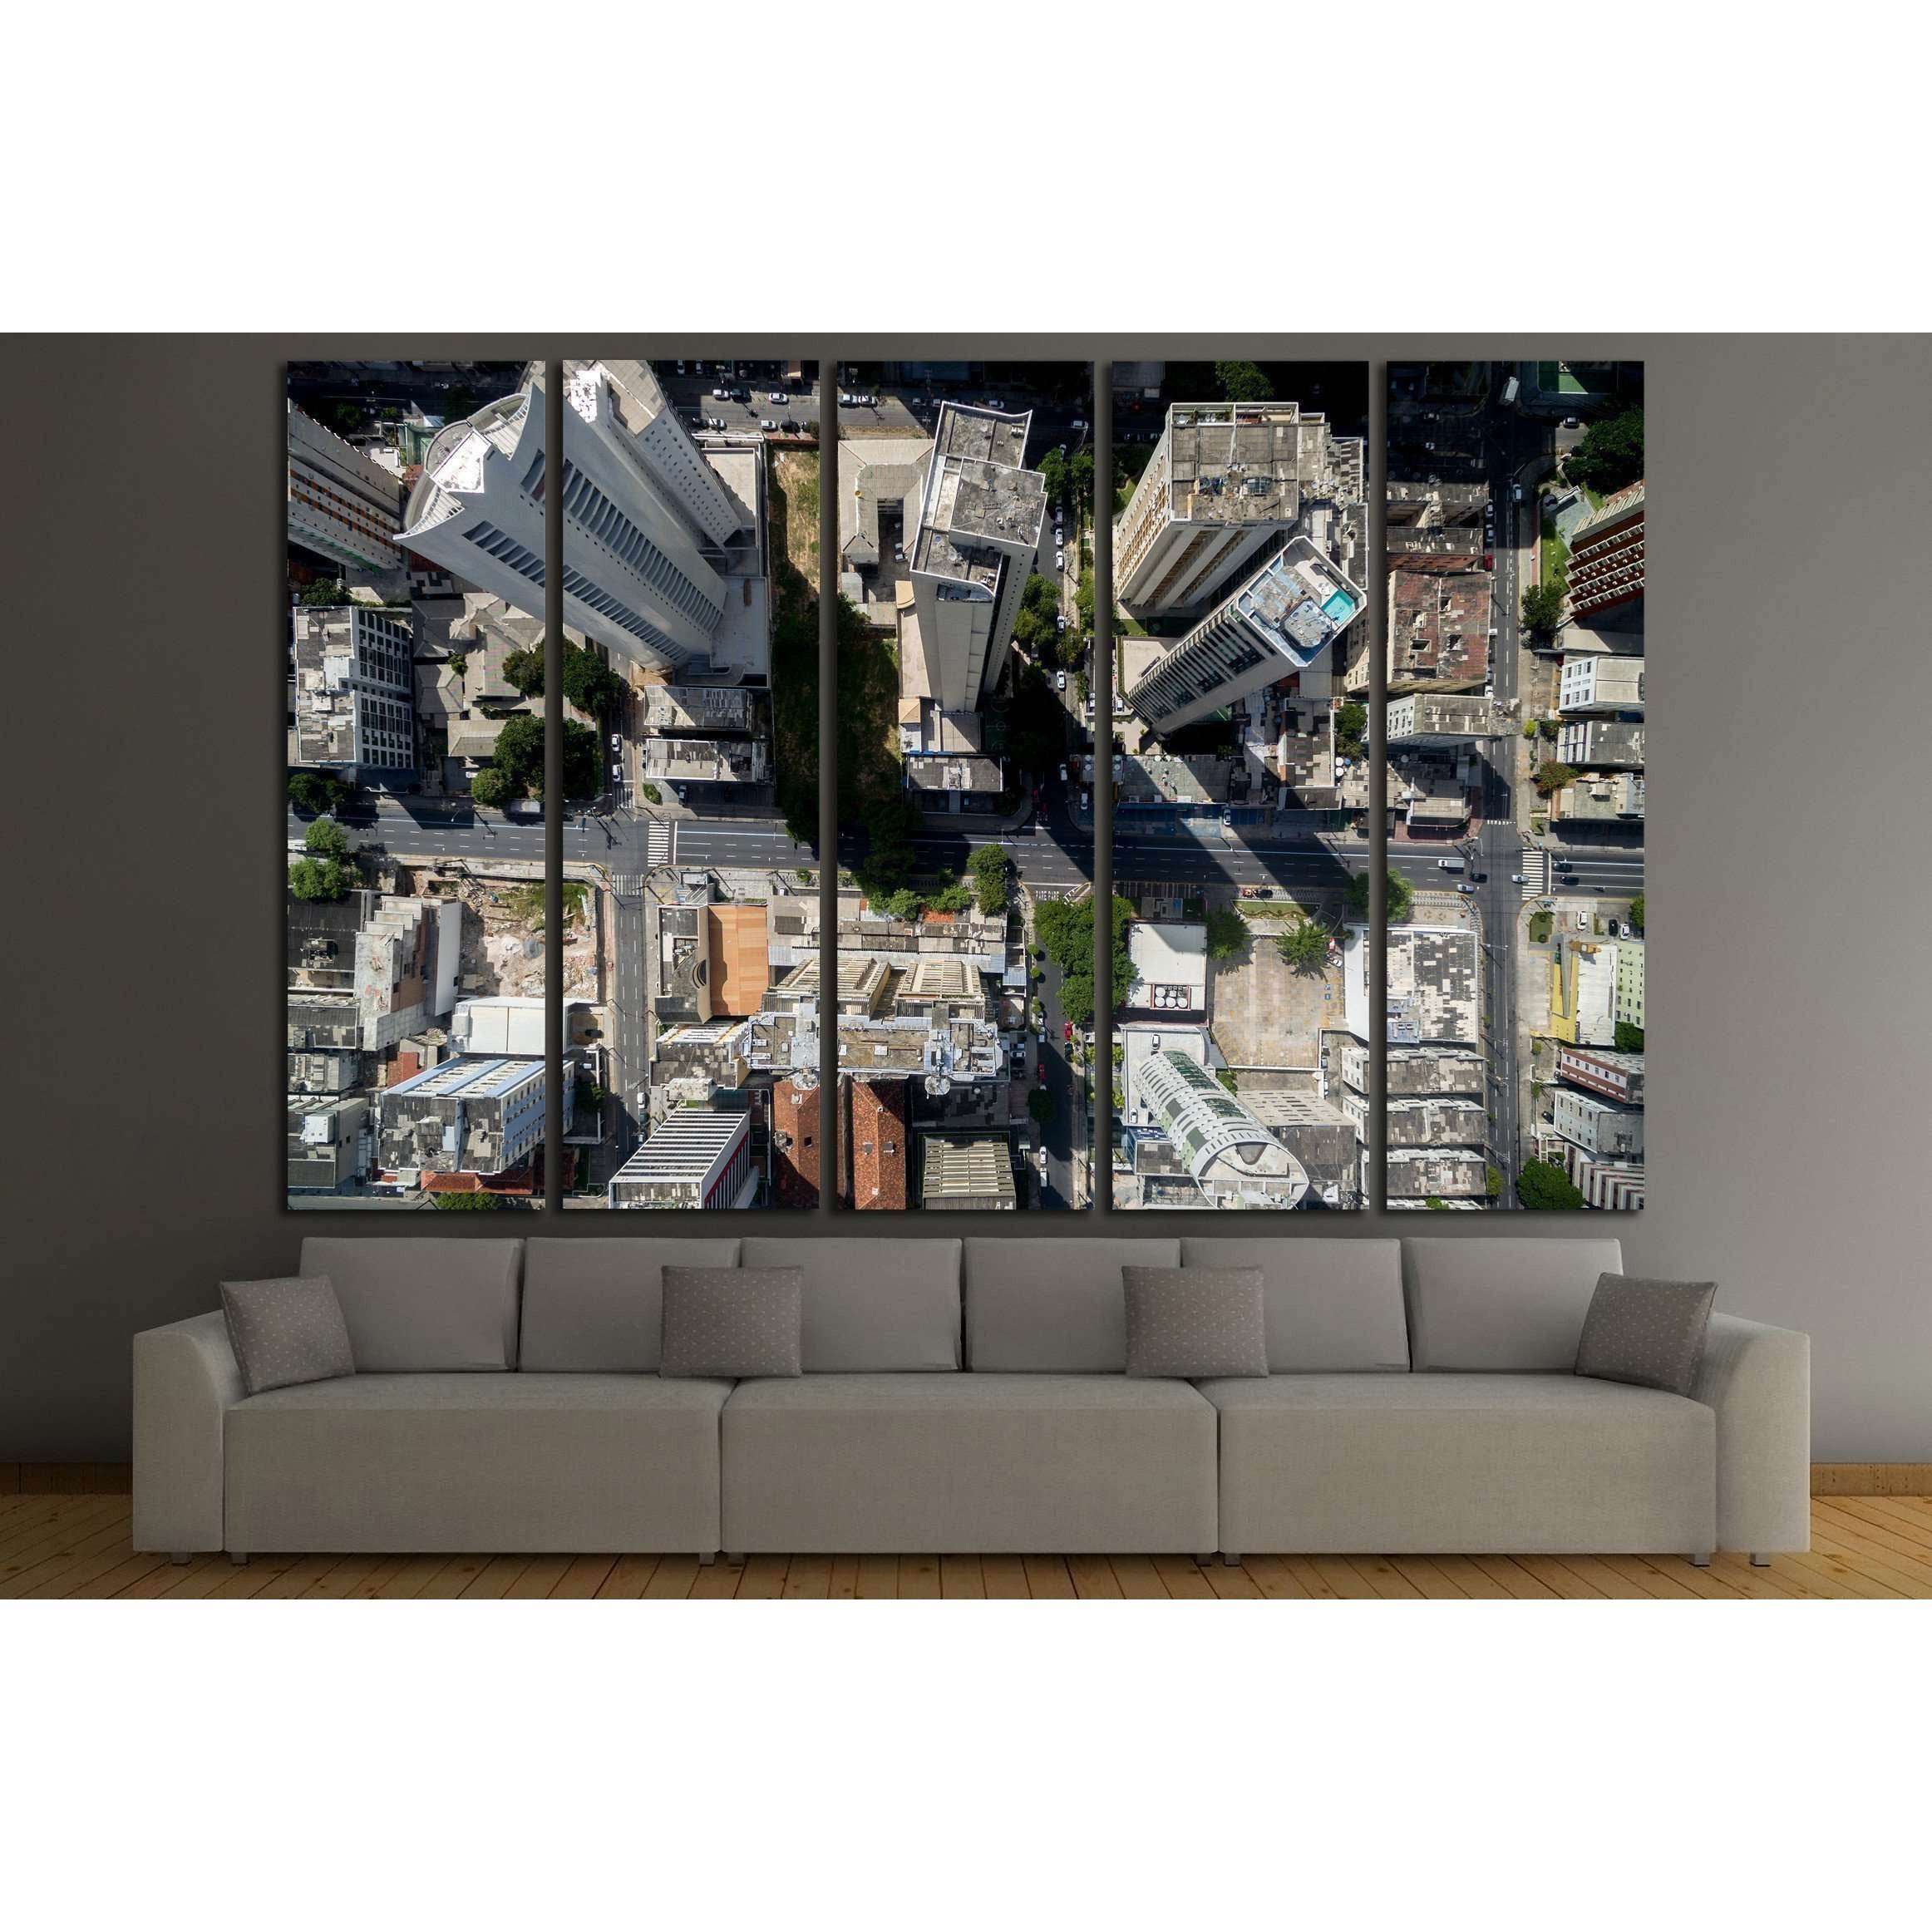 Top View of Skyscrapers in a Big City №2198 Ready to Hang Canvas Print